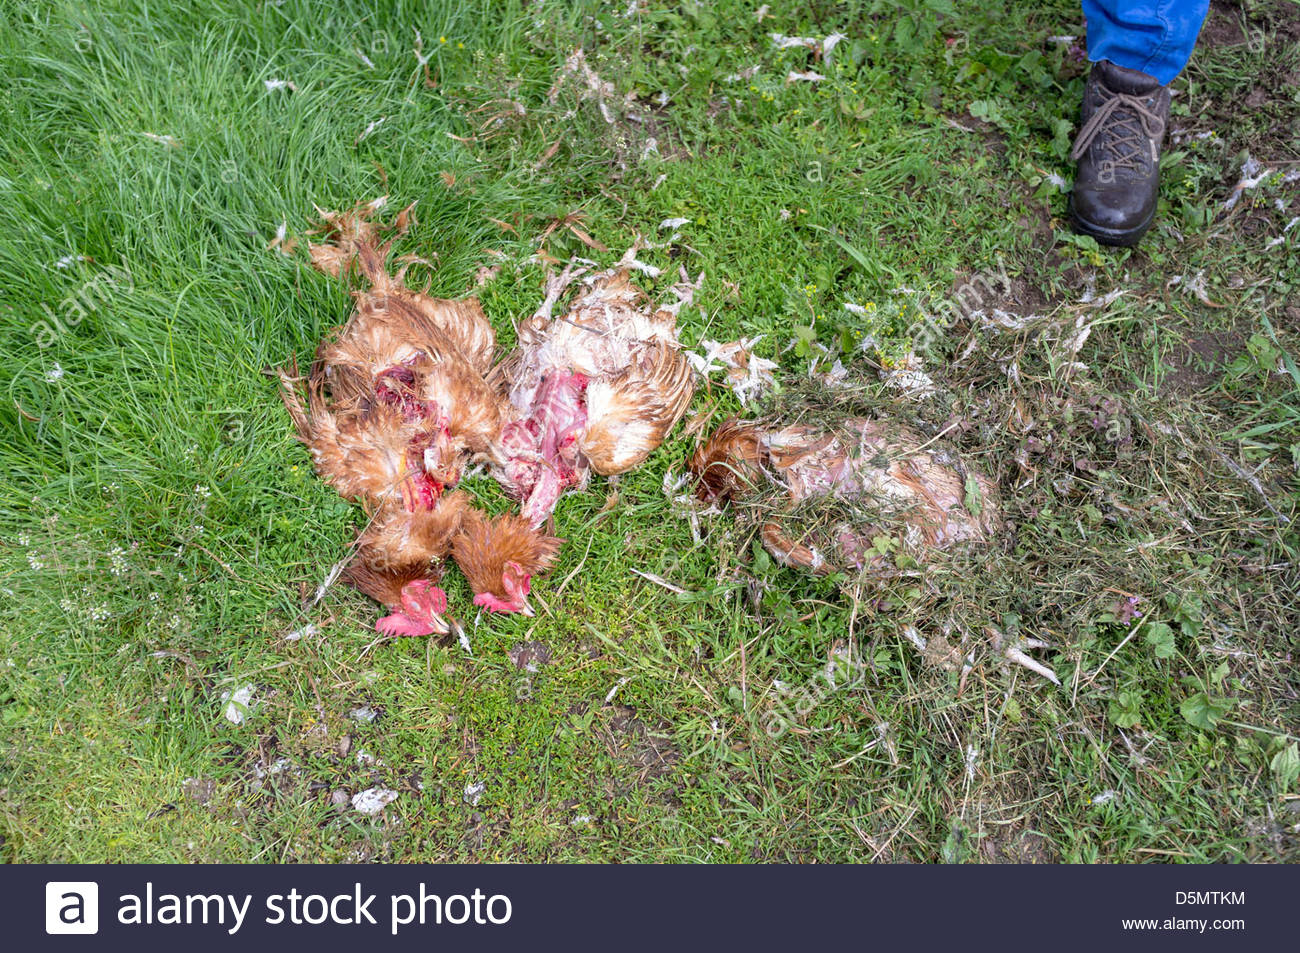 A man inspecting his chickens which were killed by an animal in the